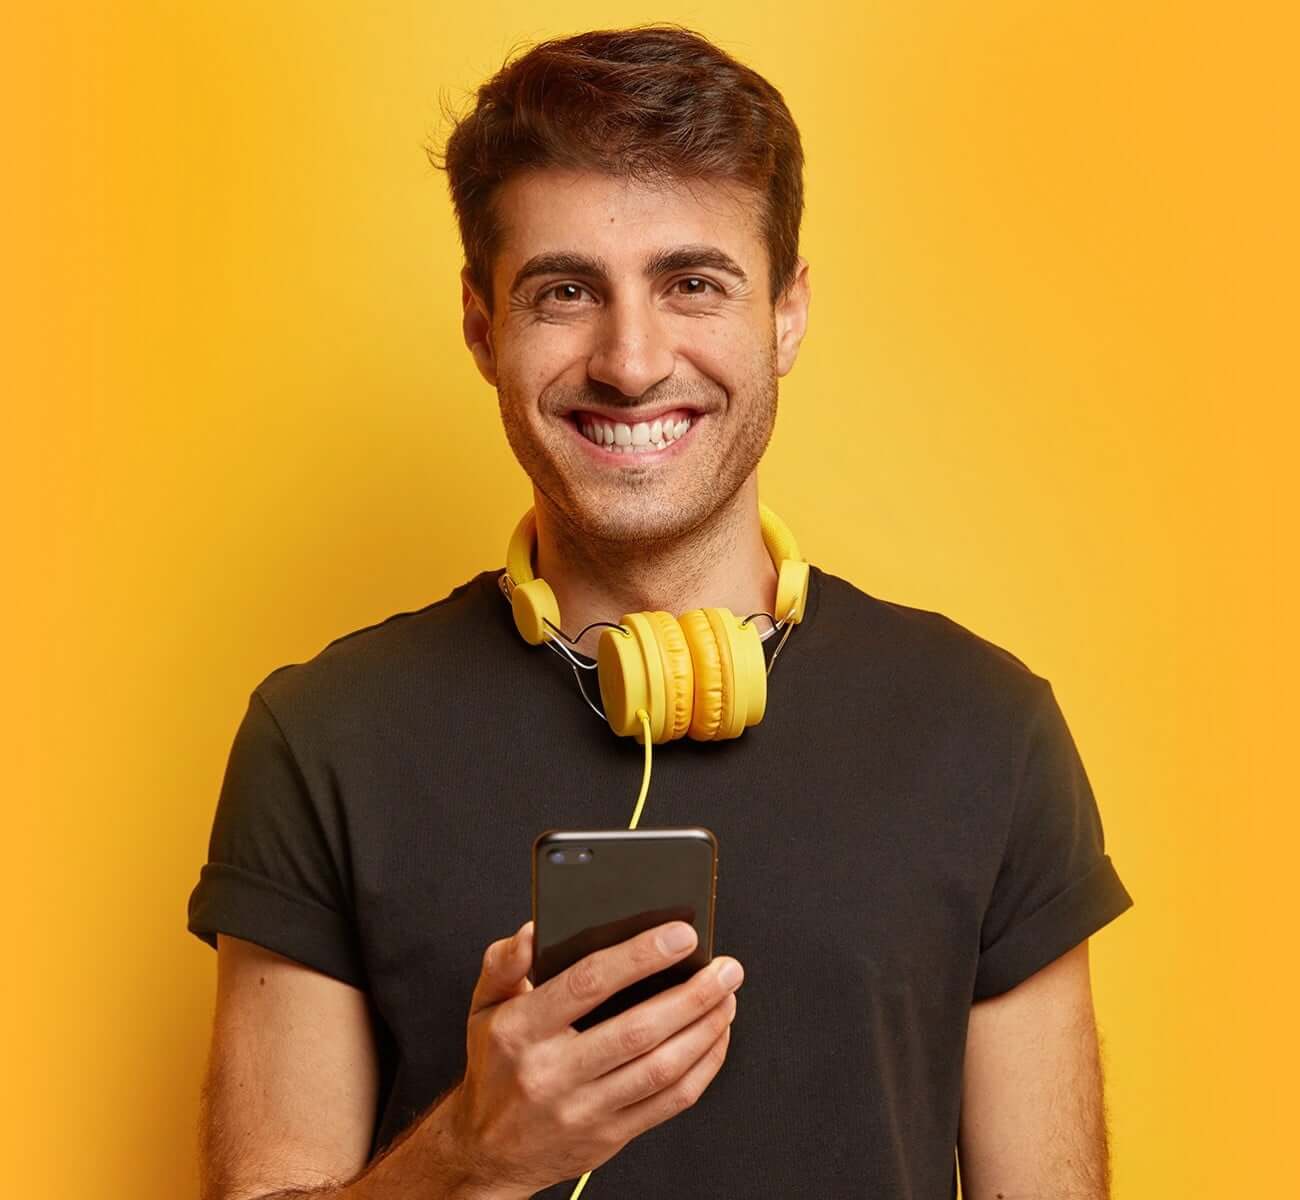 Smiling young man holding a phone and wearing orange head phones, all on an orange background